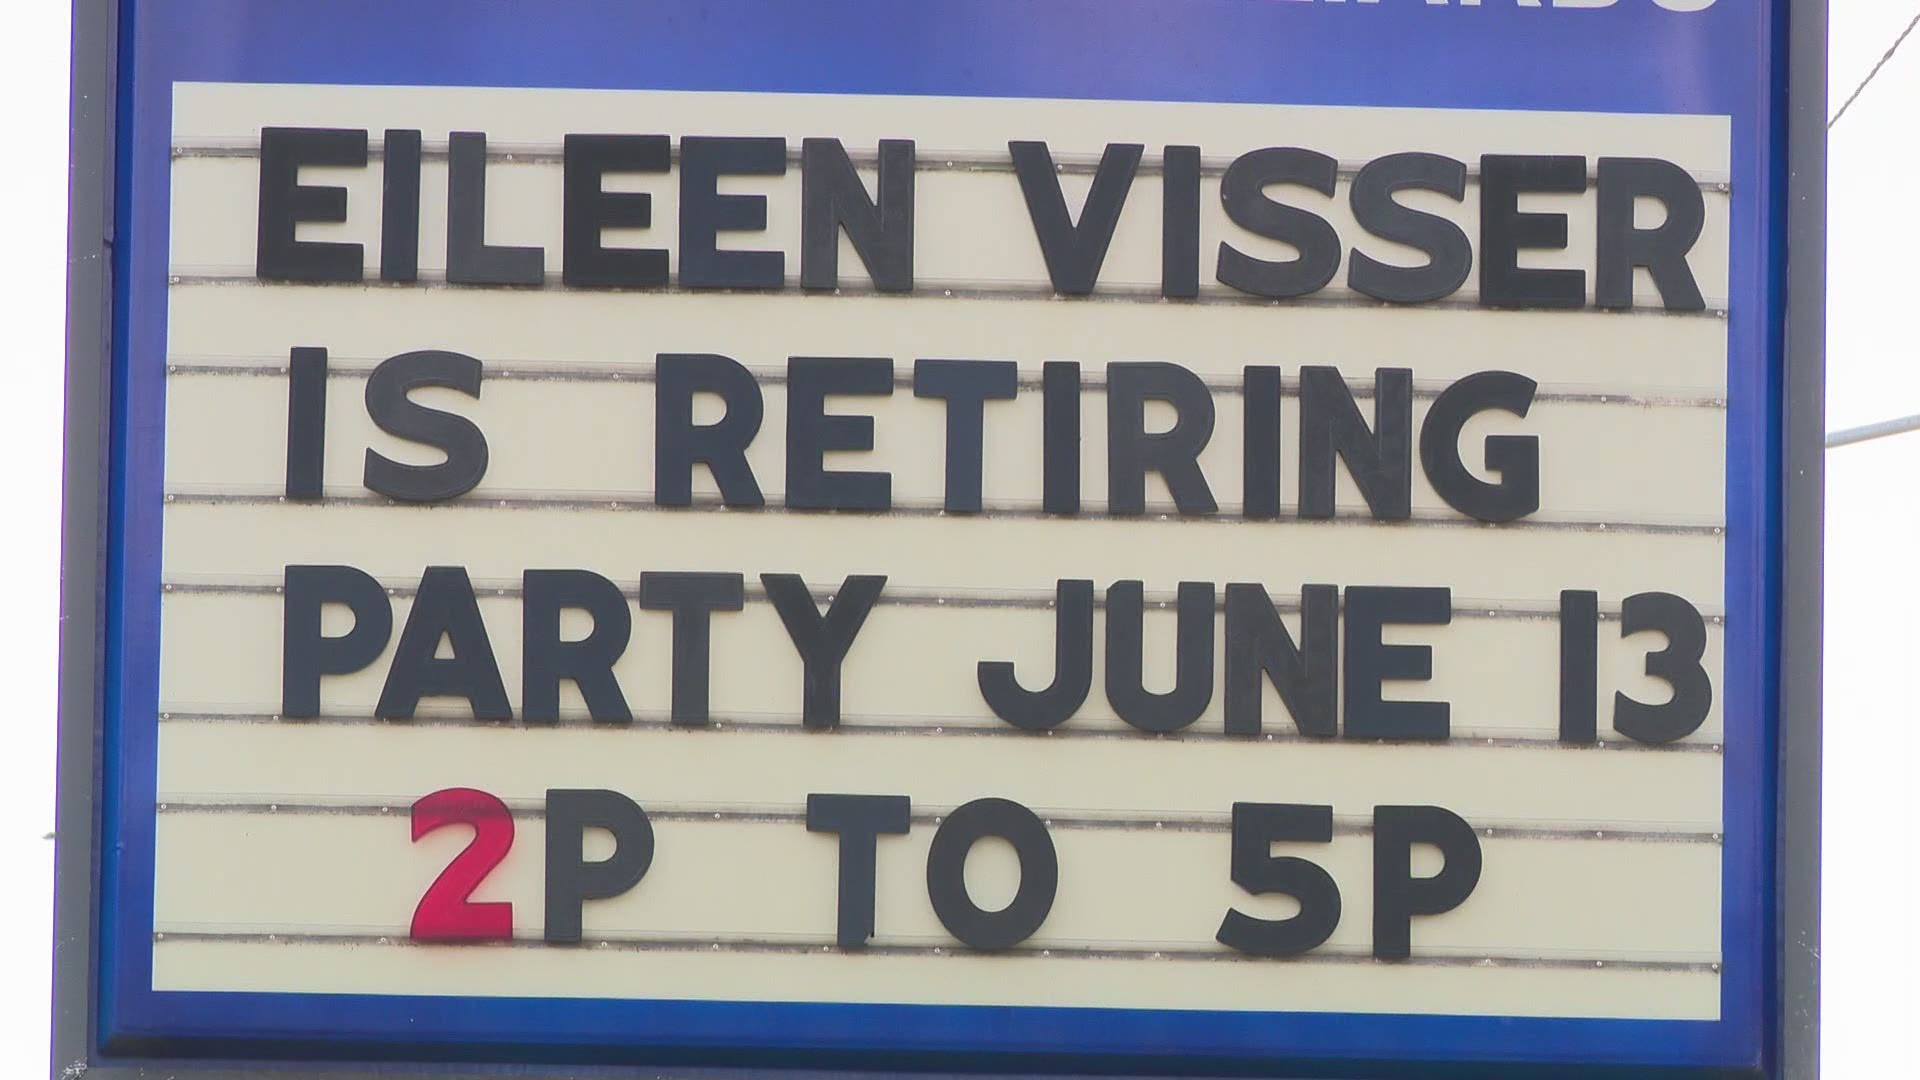 When Eileen Visser was hired at Northfield Lanes in 1968, she never imagined she'd remain employed there for 53 years. But that's what happened.